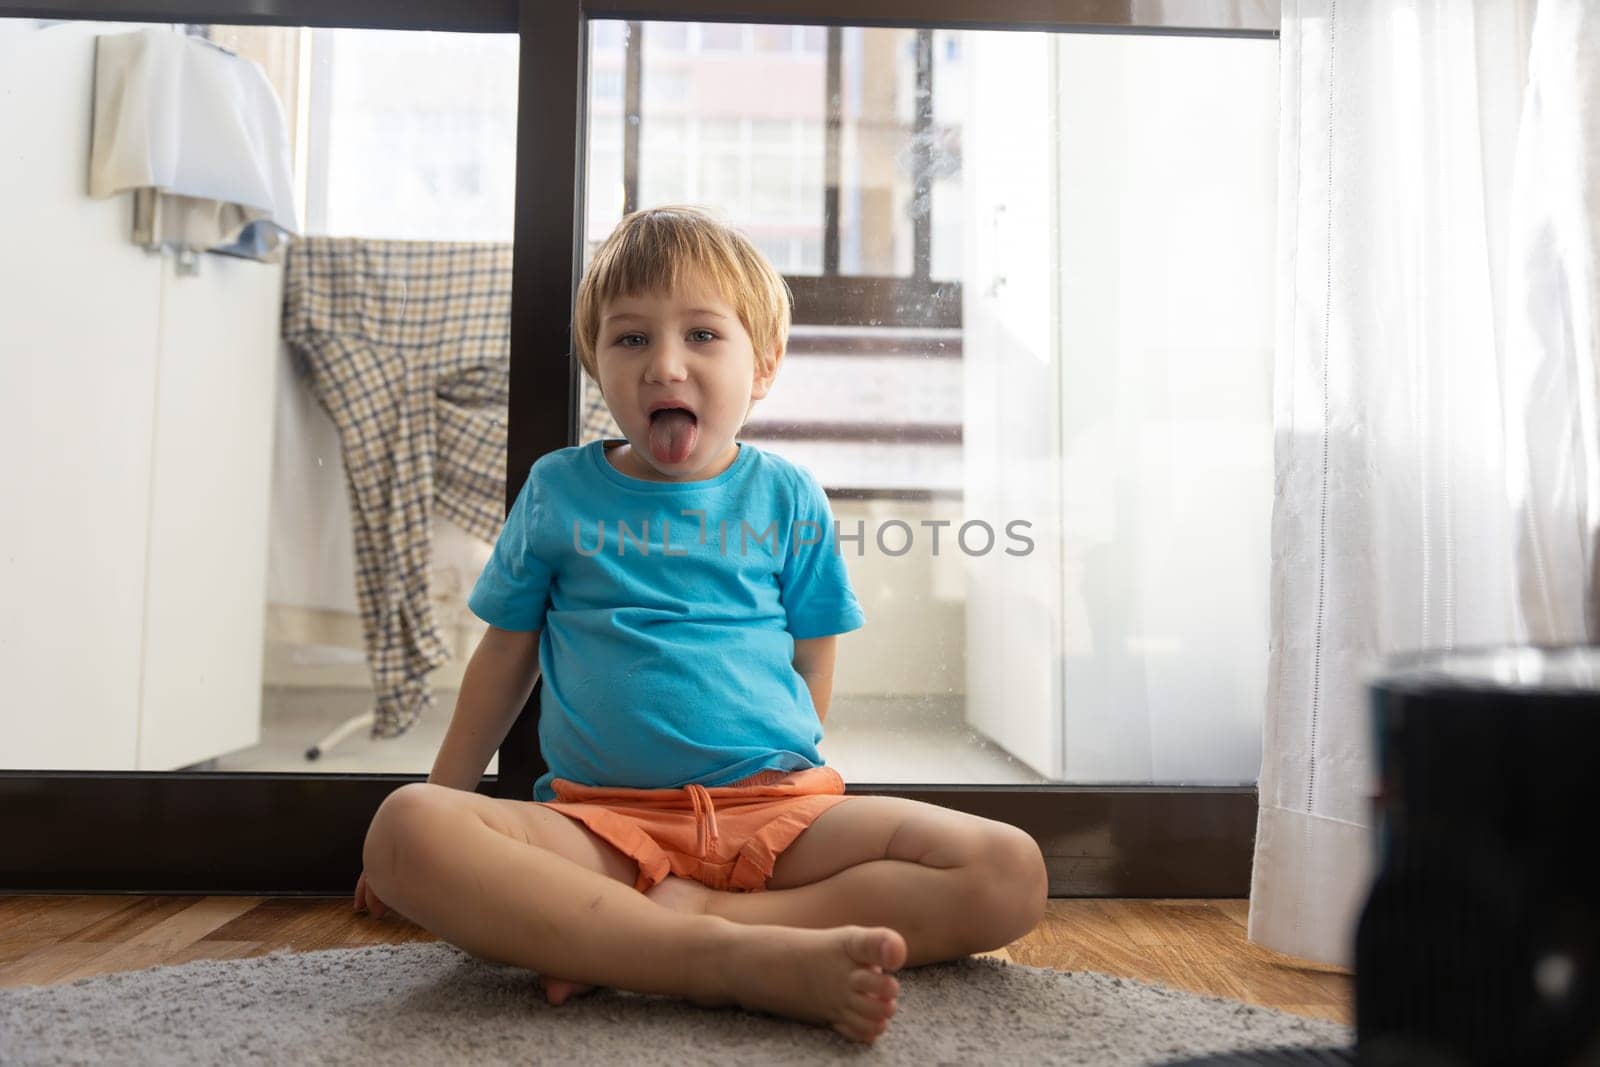 Photo of a Playful Toddler Expressing His Amusement with a Comical Facial Expression by Studia72